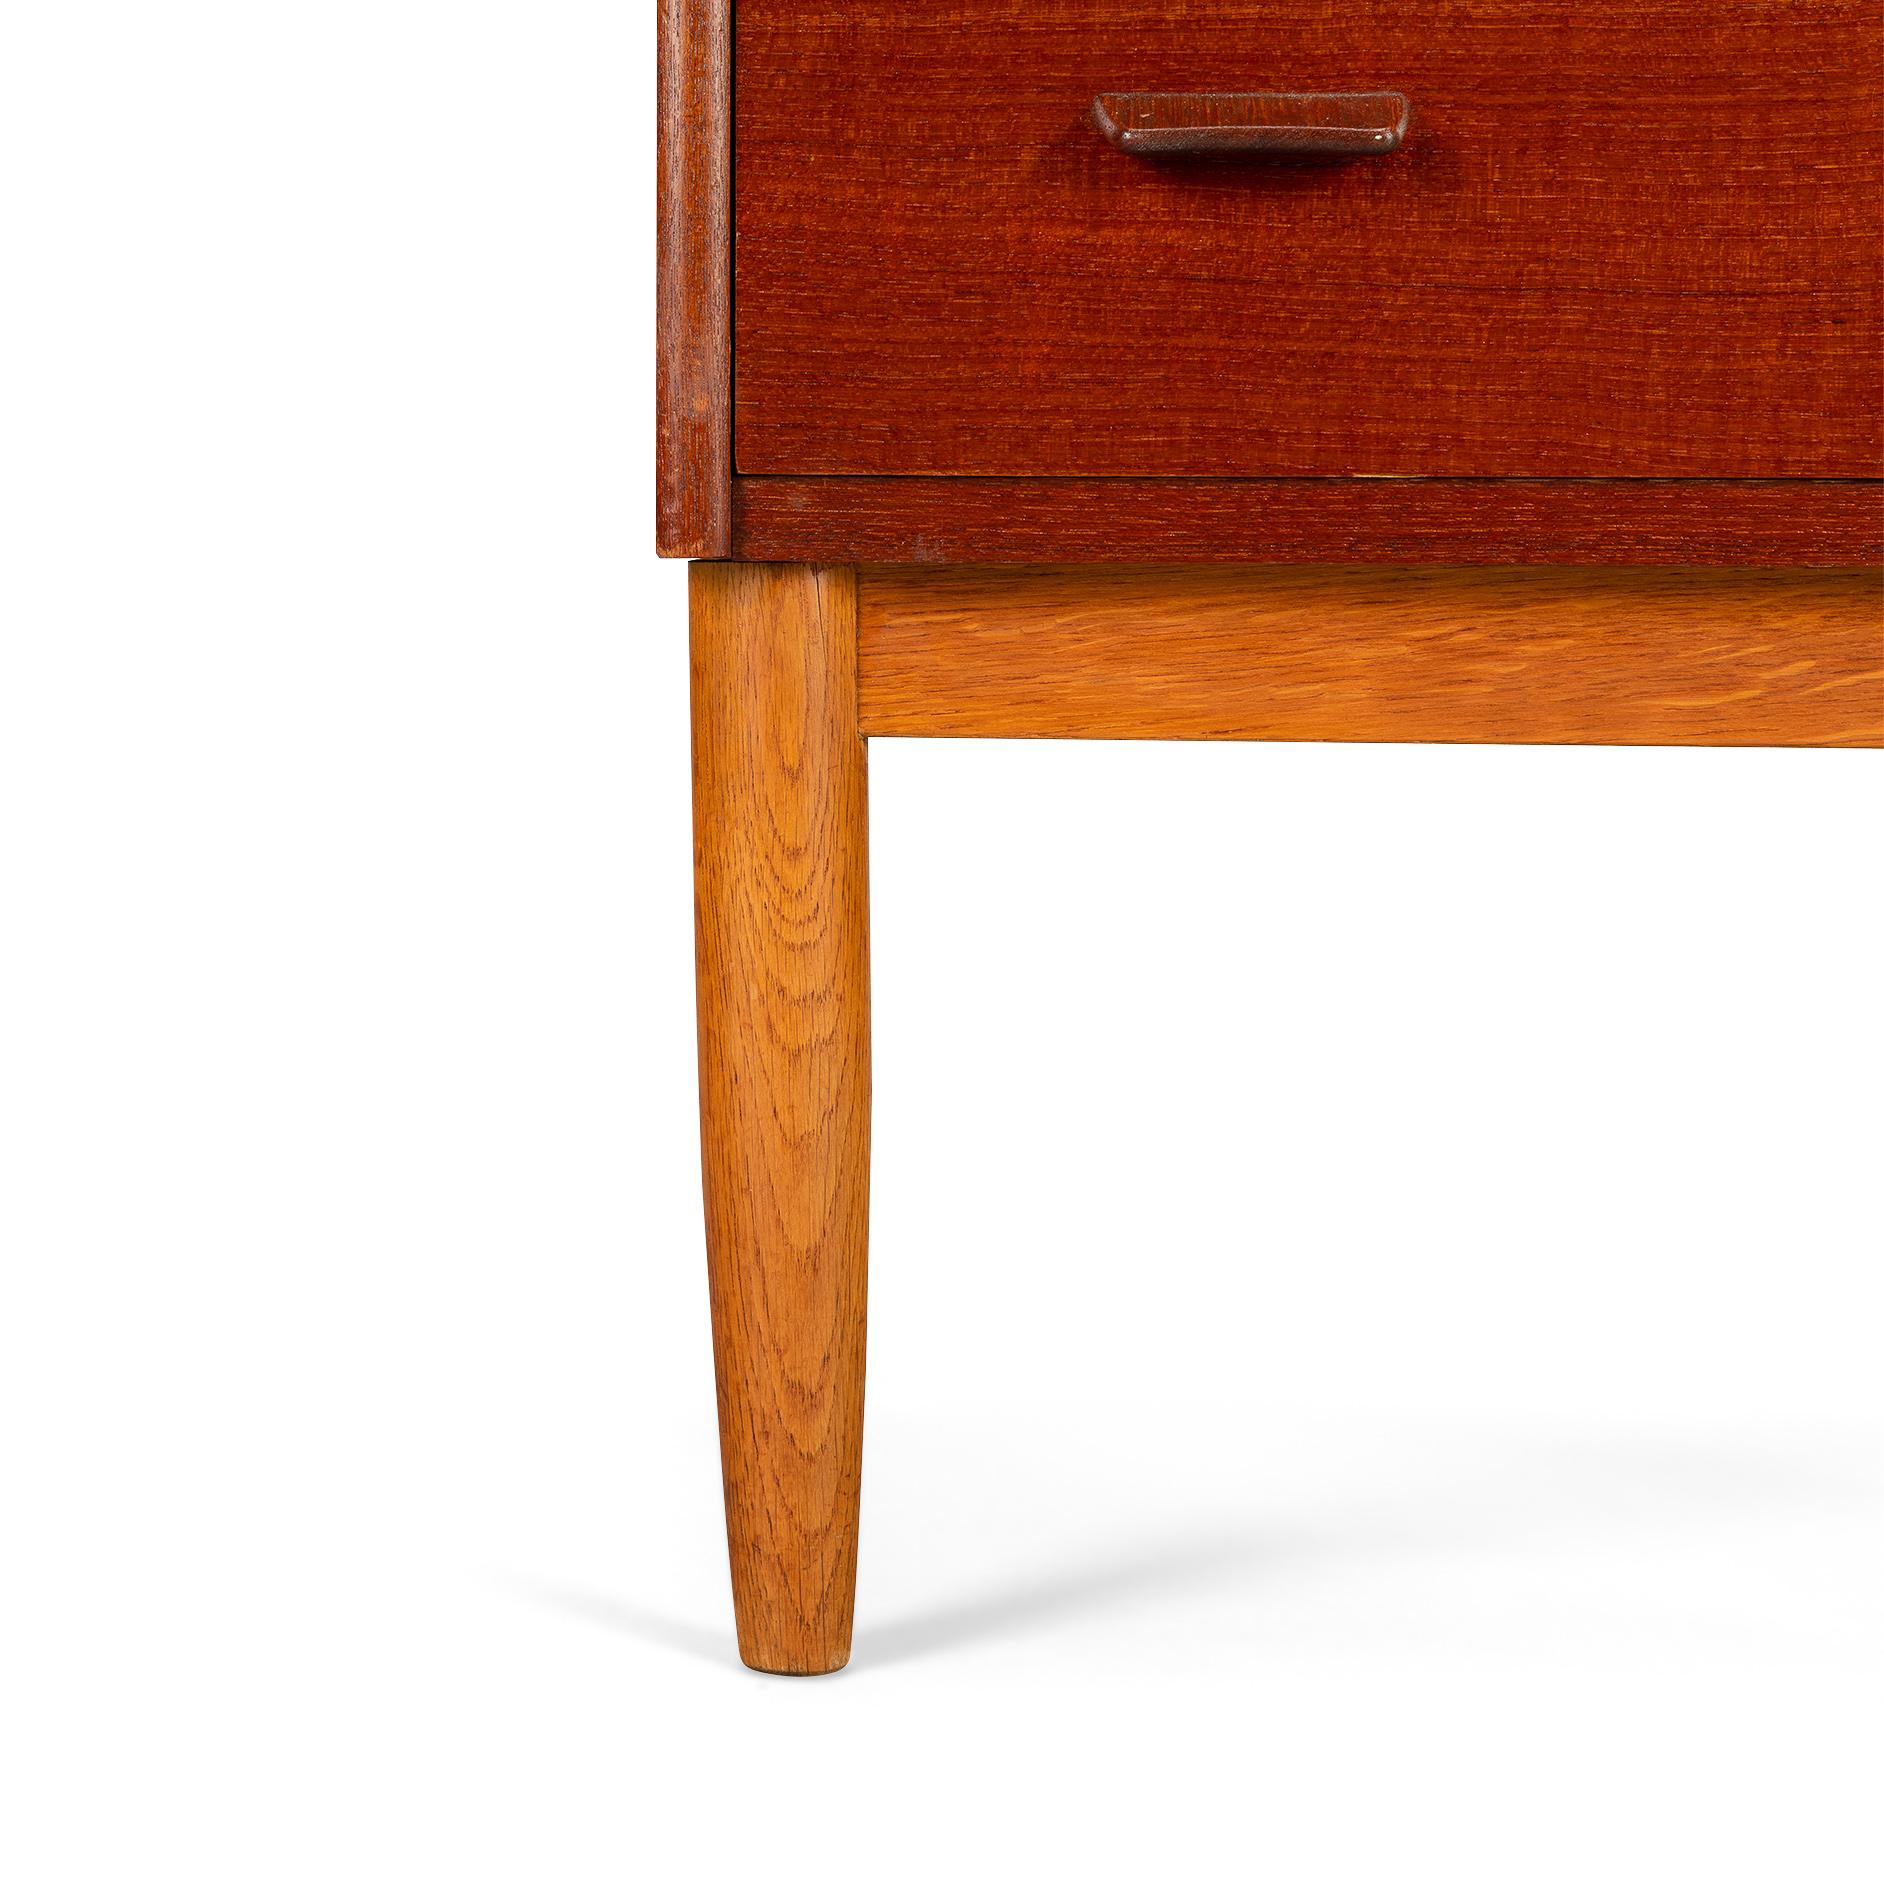 Oak Mid-Century Modern Secretary by Poul Volther, 1960s For Sale